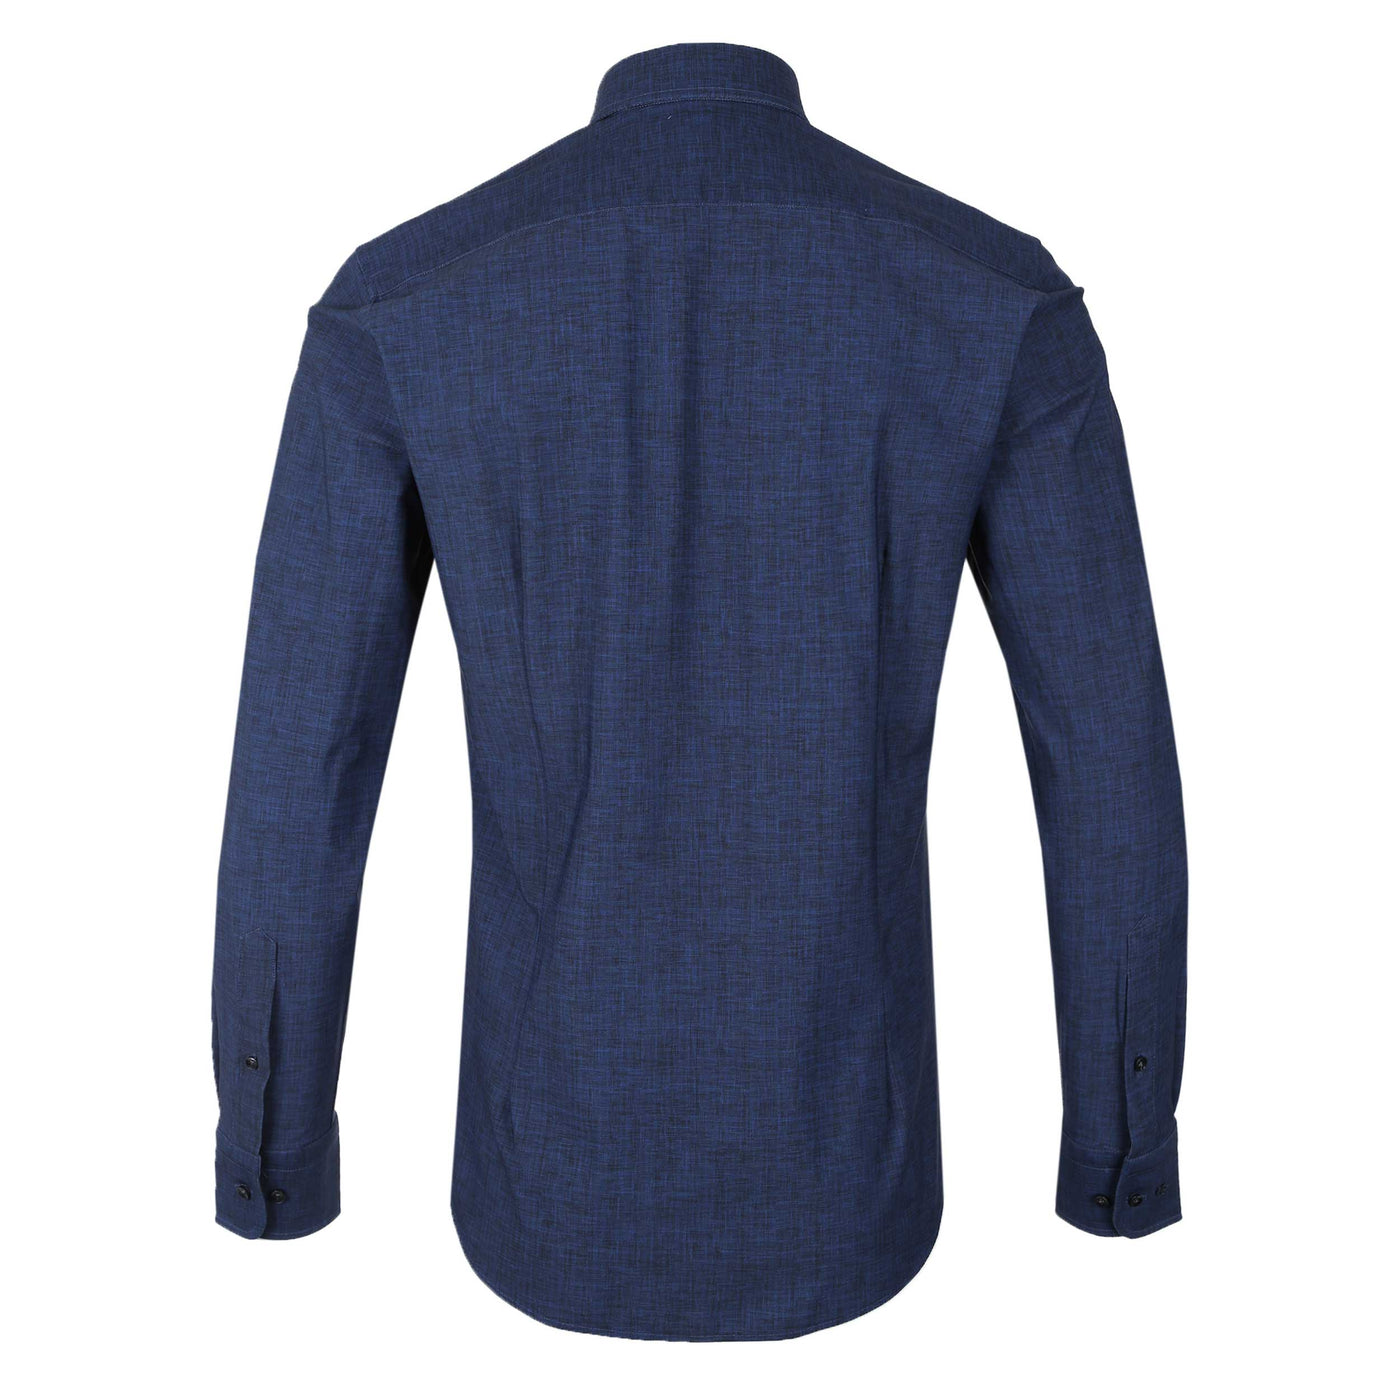 Thomas Maine Canclini Stretch Shirt in Navy Back